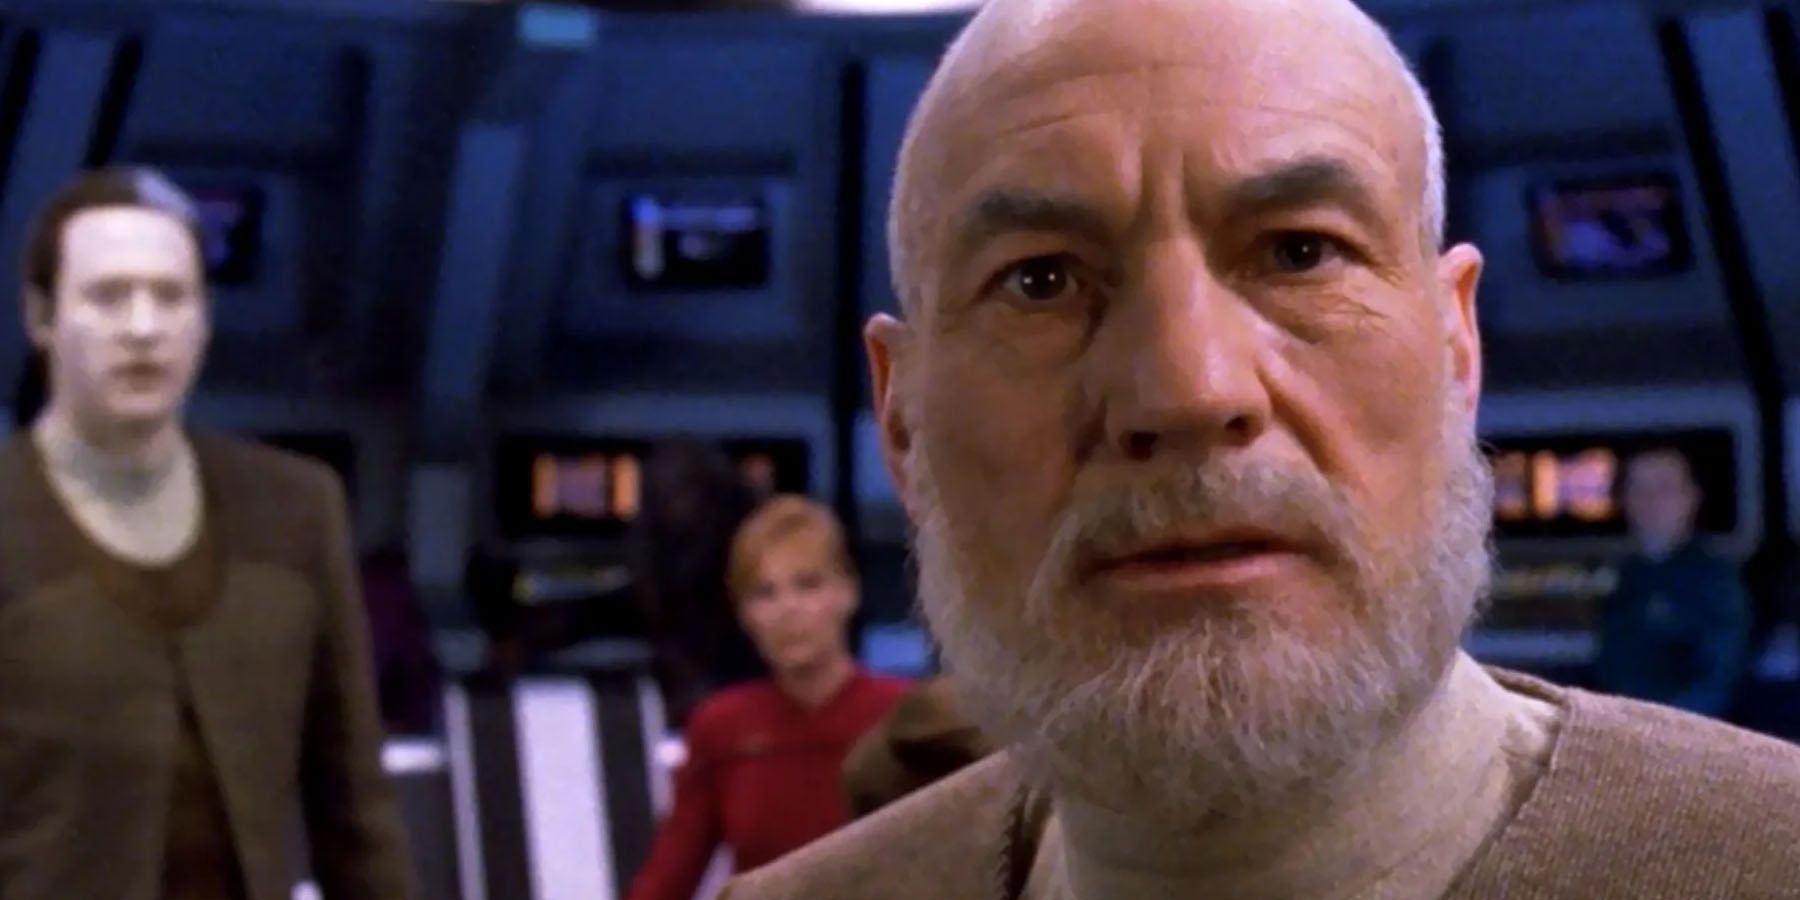 An-Aged-Picard-in-All-Good-Things-2